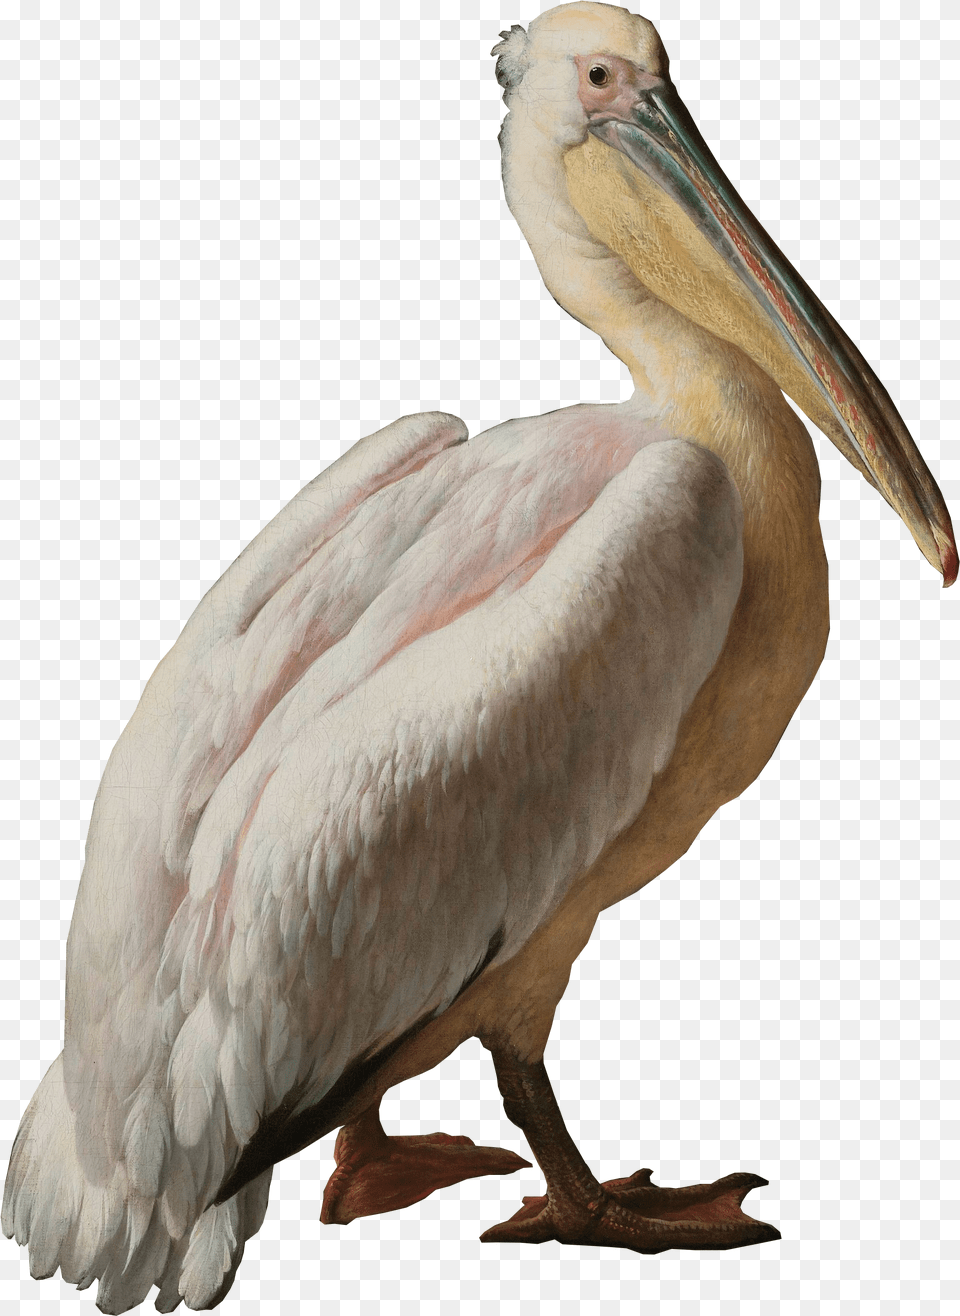 Pelican Seabird Pelecaniformes Water Bird Pelican Pelican And Other Birds Near A Known As Floating Free Png Download